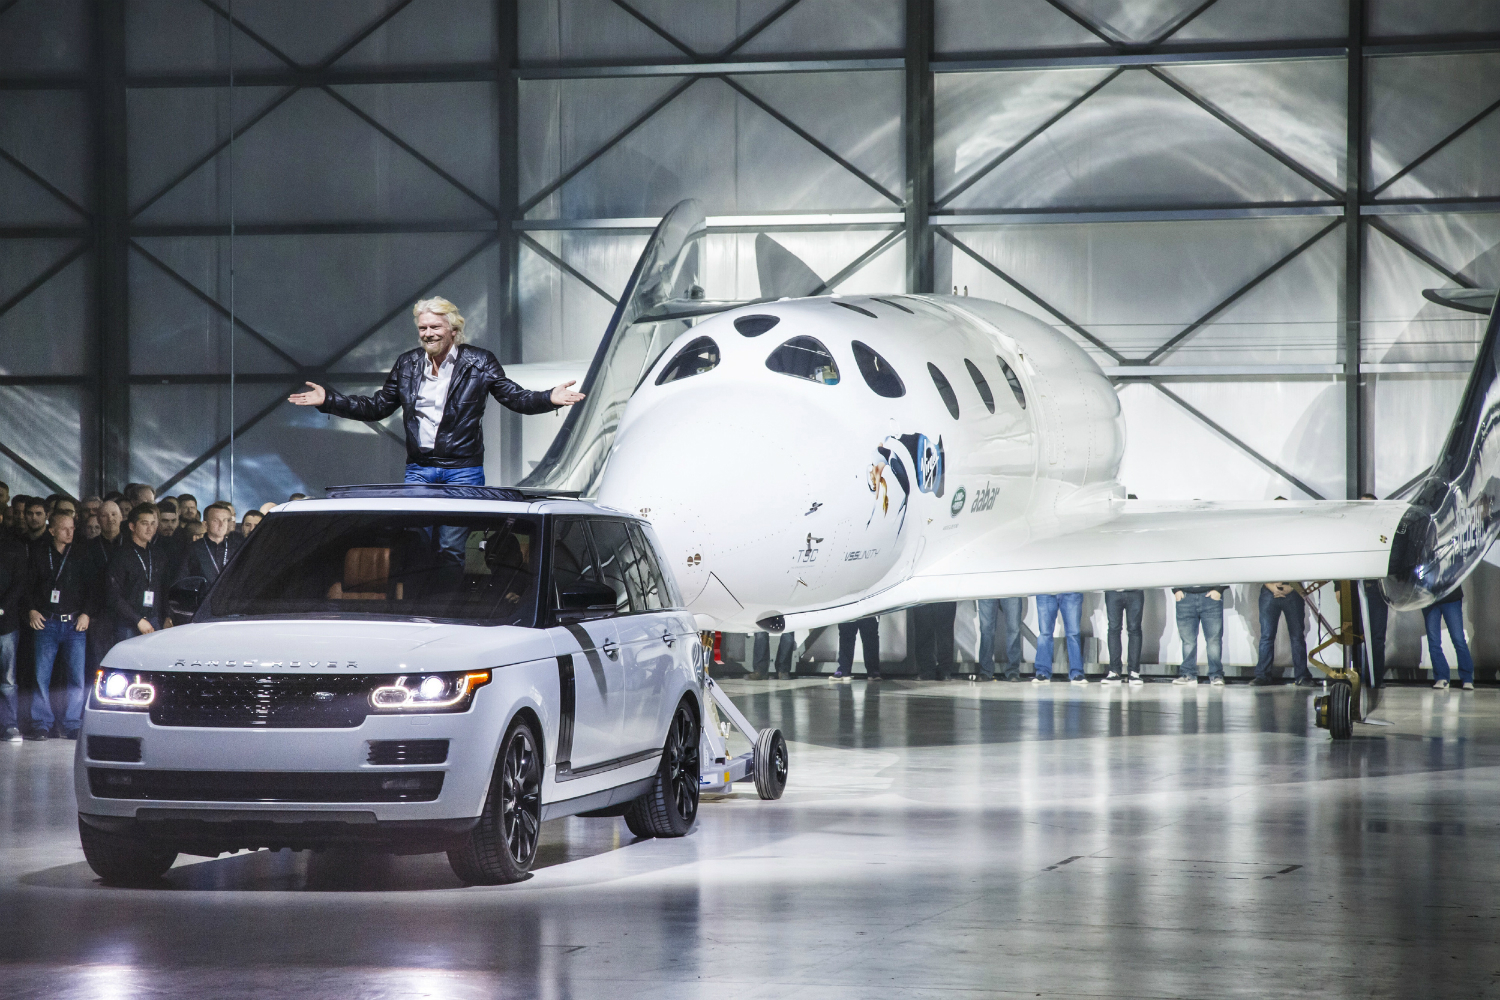 range rover astronaut edition for virgin galactic customers only  2